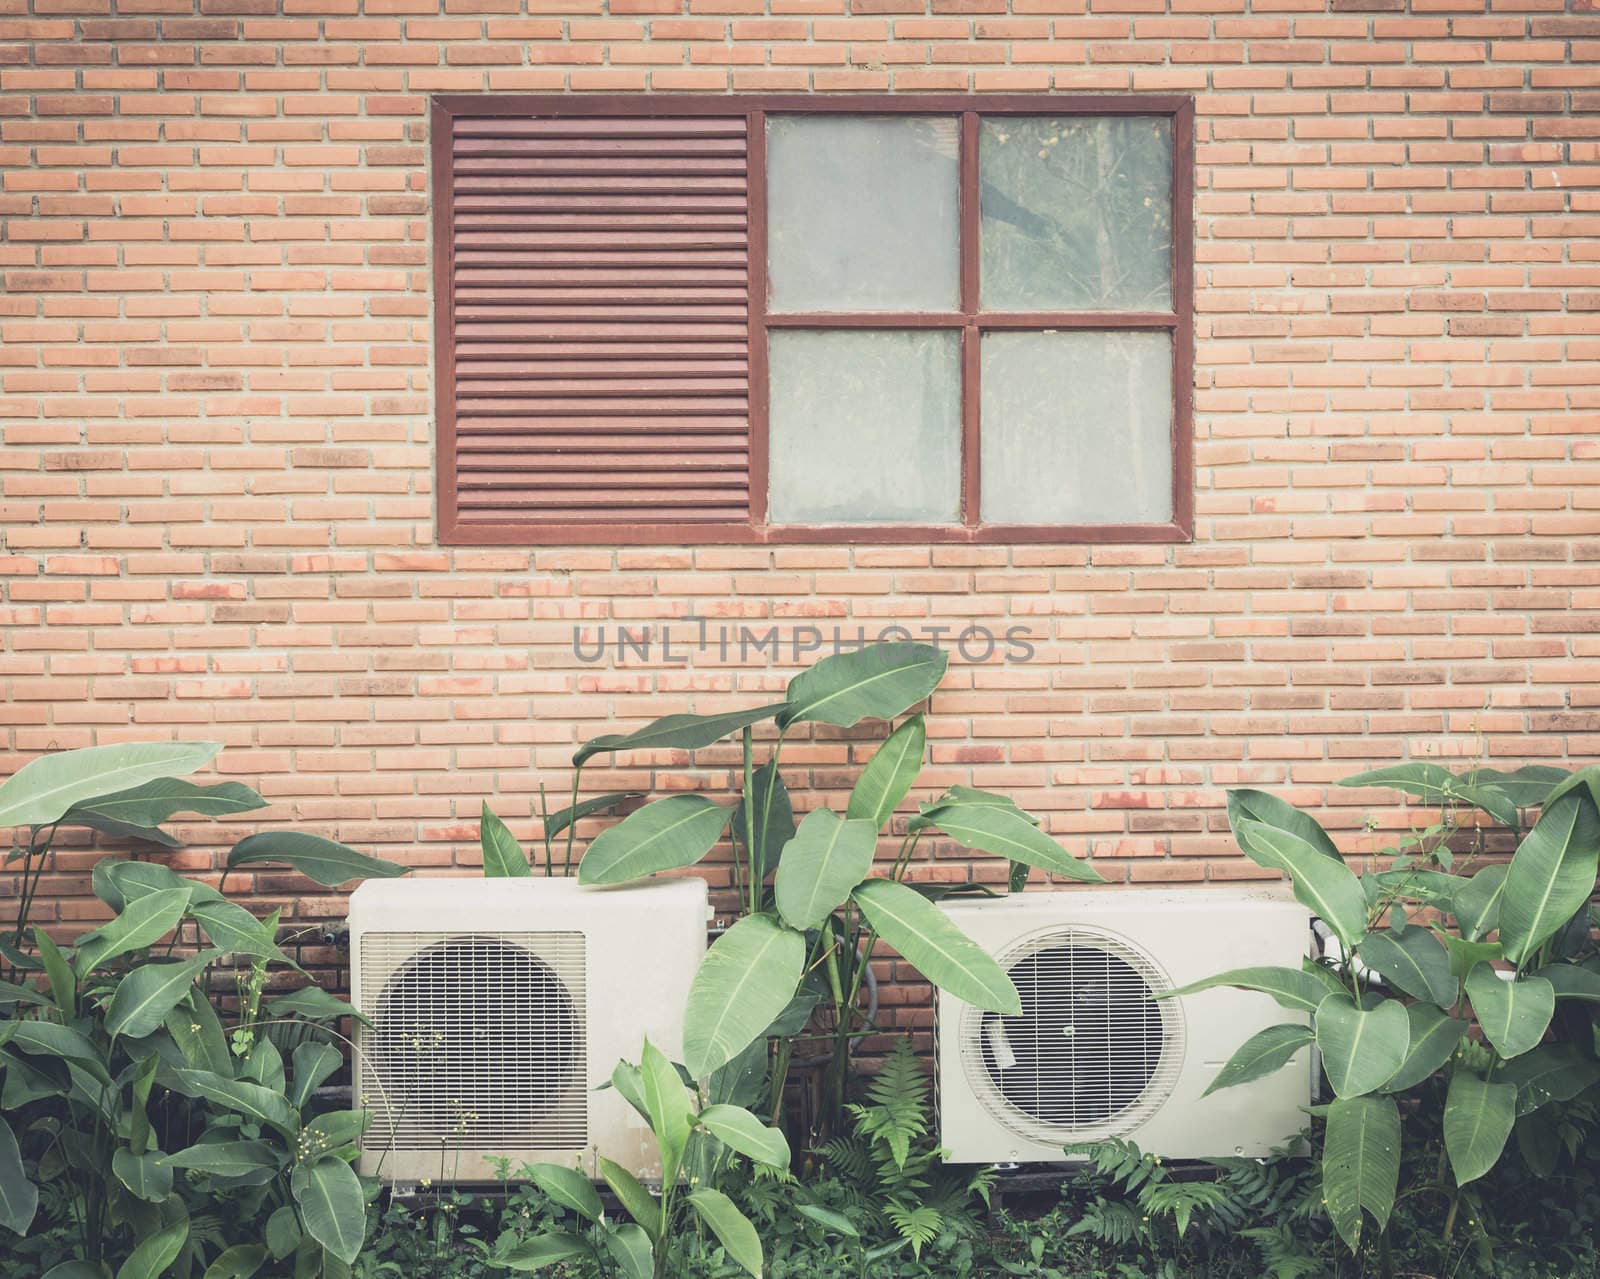 old windows on brick wall with Air conditioner process photo in retro style